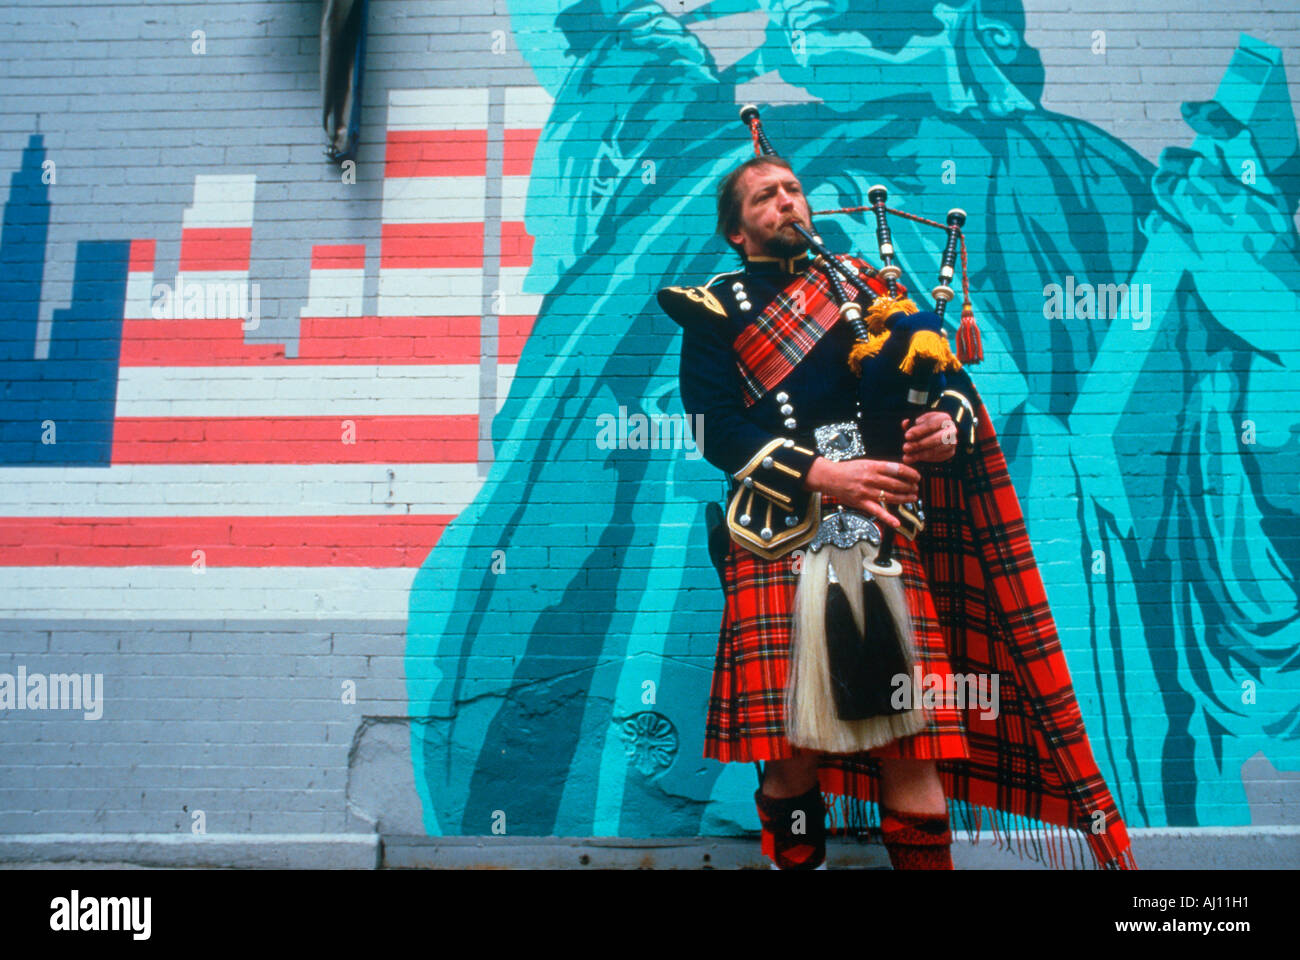 A man in kilt playing bagpipes in front of a patriotic mural St Patrick s Day Parade NY City Stock Photo